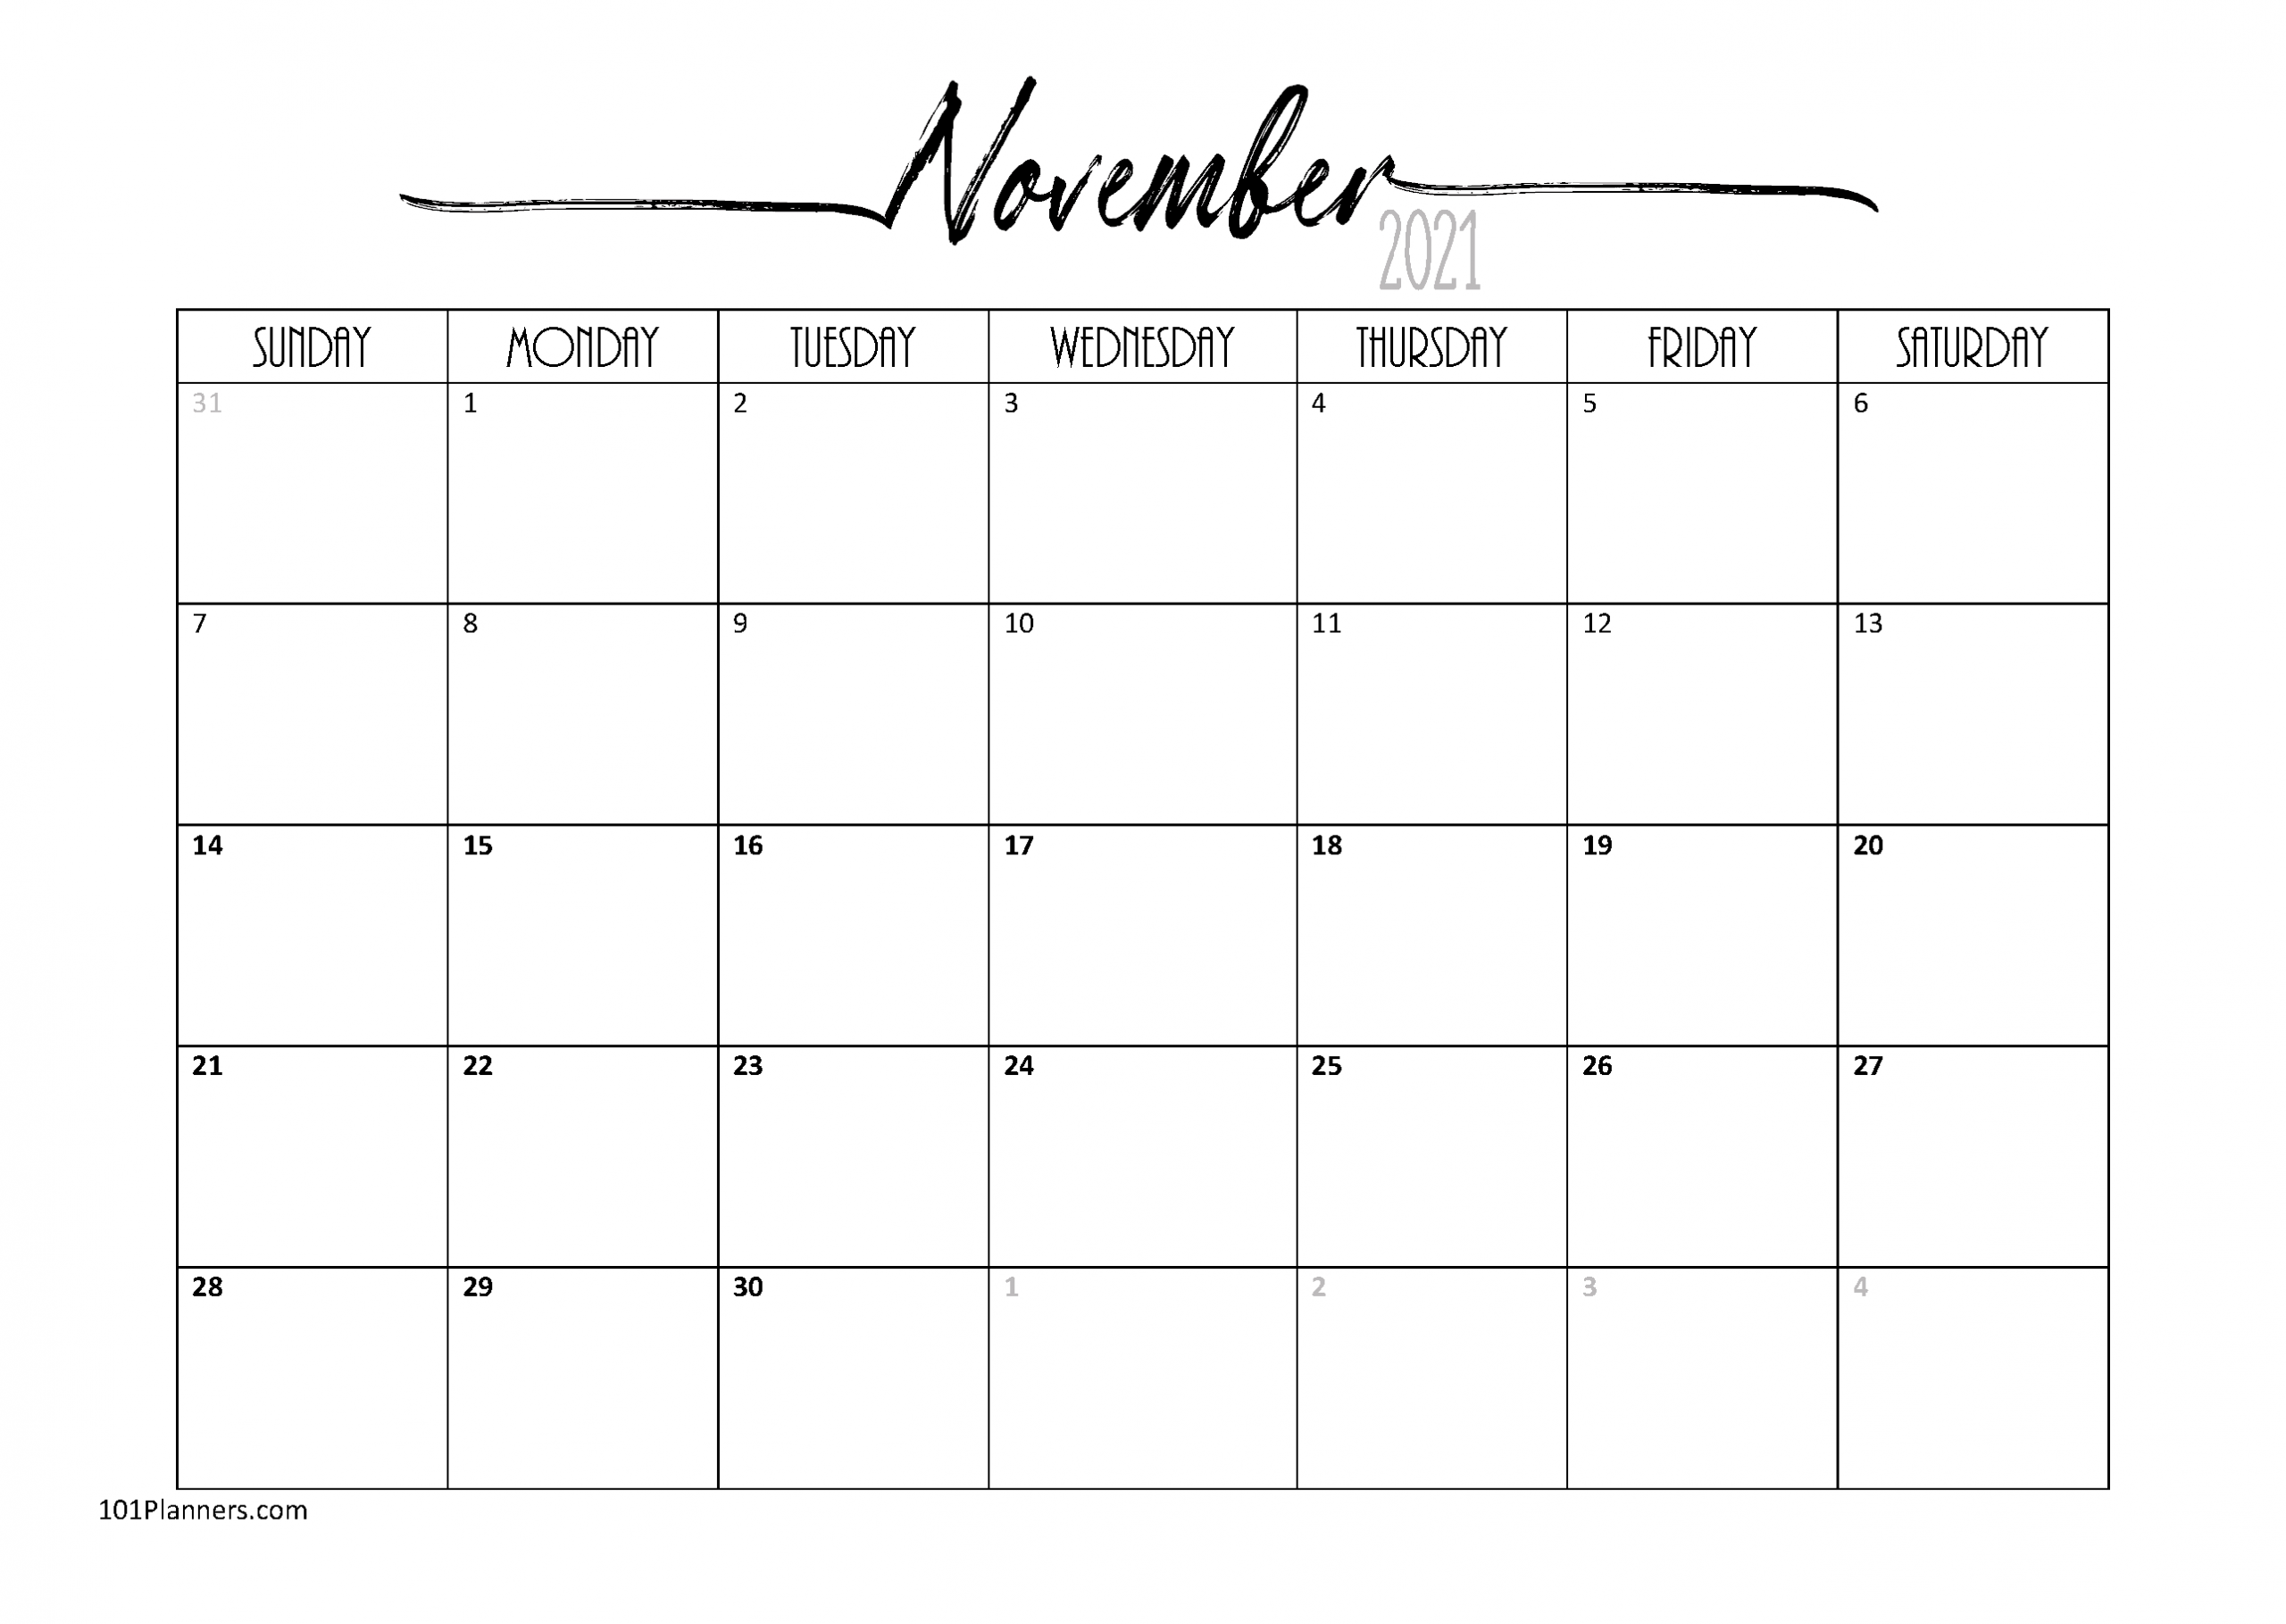 Free Blank Calendar Templates | Word, Excel, Pdf For Any Month 1 November 2021 In Islamic Calendar